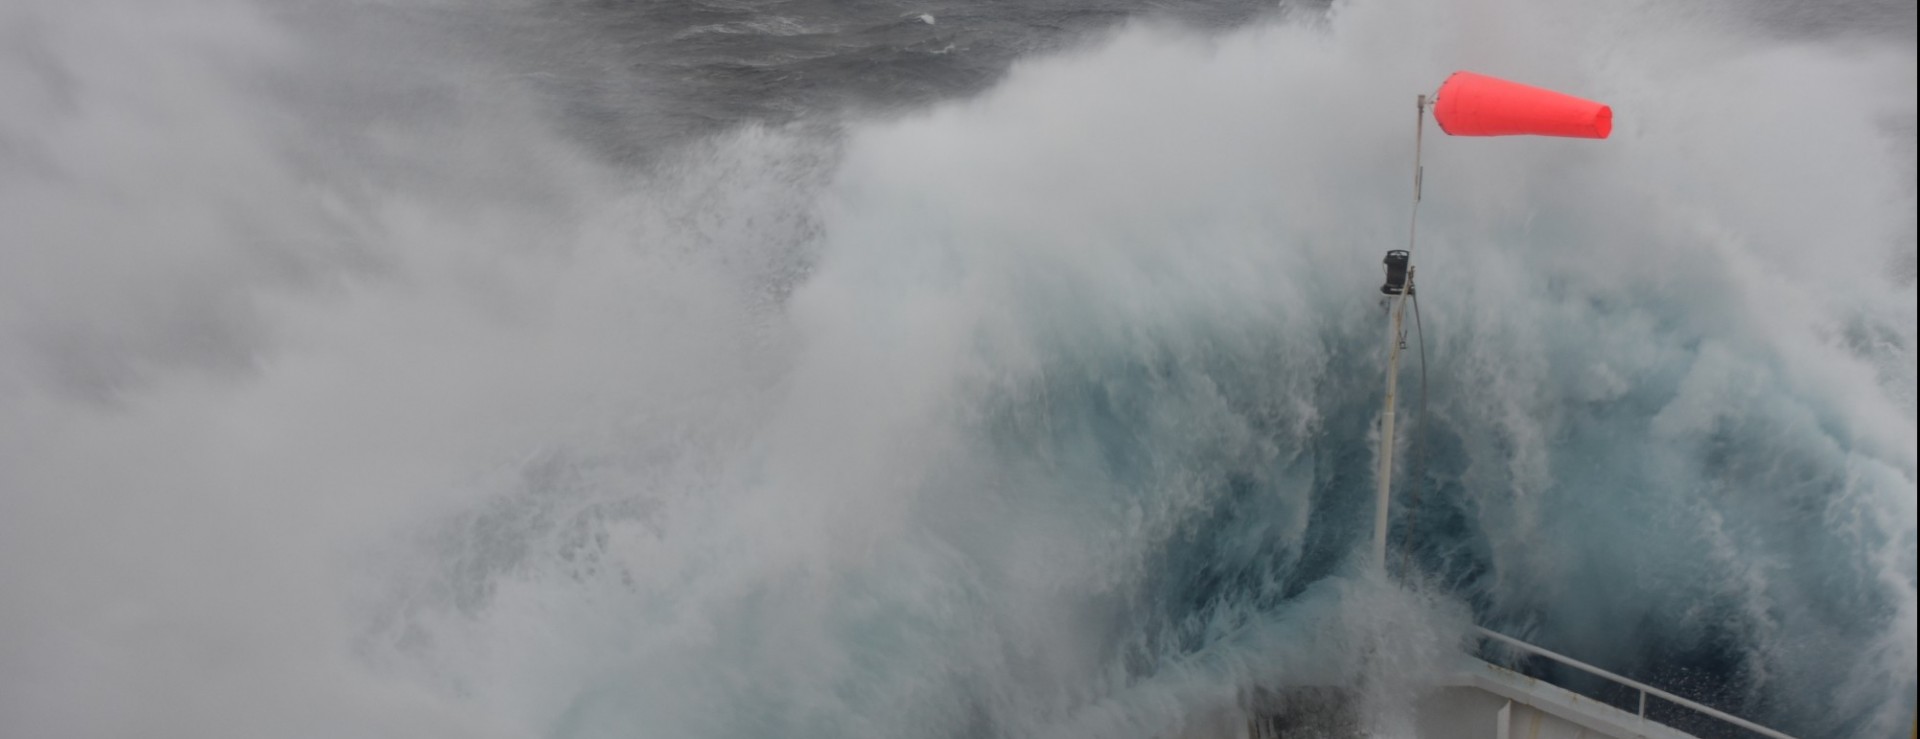 Waves crashing over the bow of the R/V JOIDES Resolution